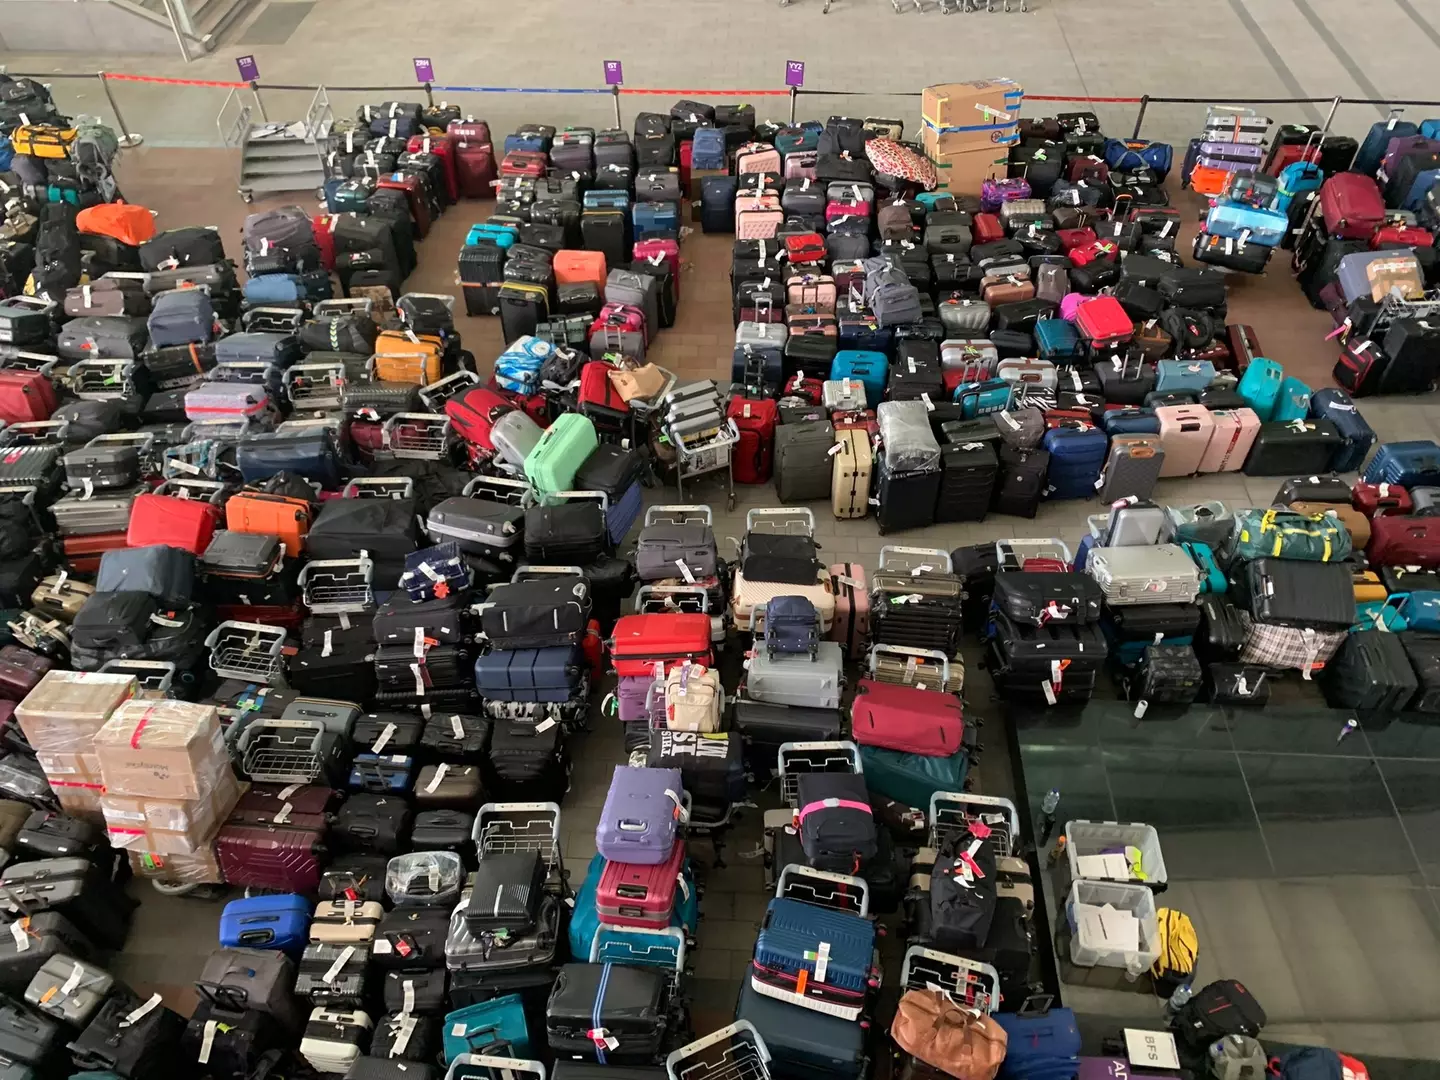 Heathrow's Terminal 2 was covered in what was described as a 'luggage carpet'.